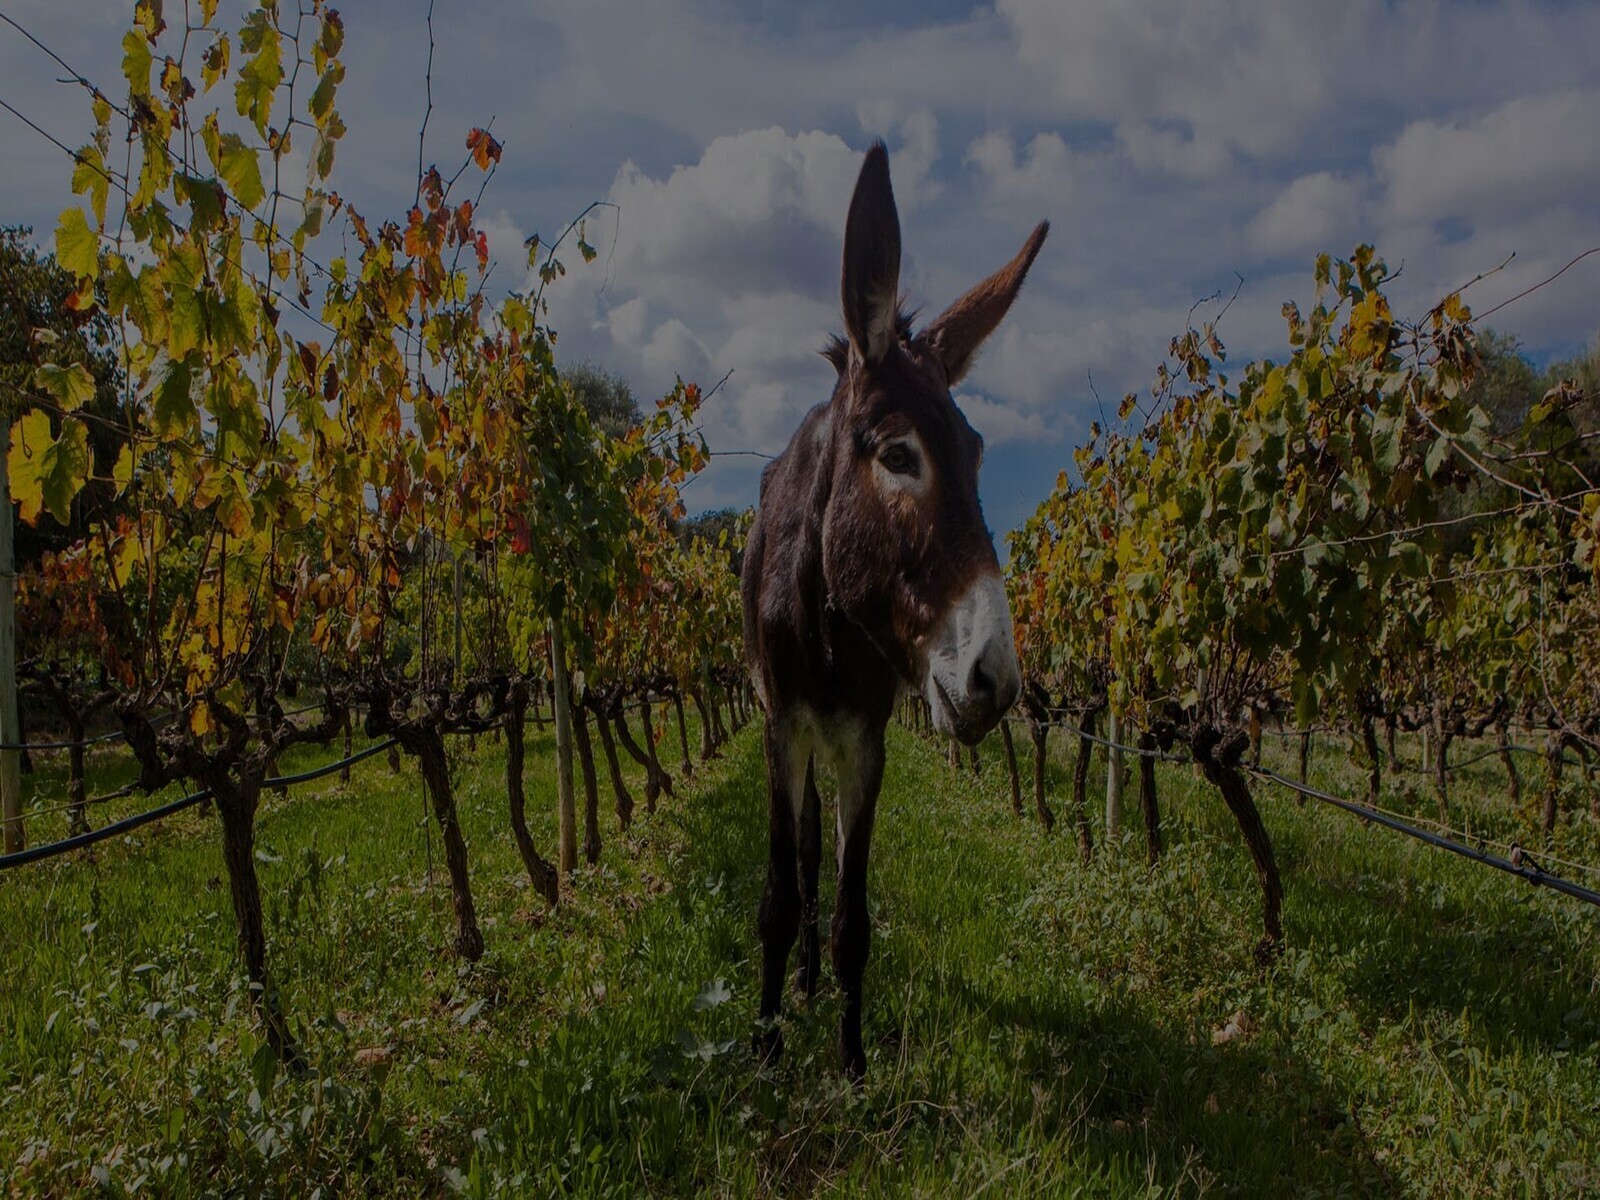 Biodiversity and respect for natureReturn to the viticulture and vineyard work that has been practised for centuries, based on a deep knowledge of nature and a passion for fruit.